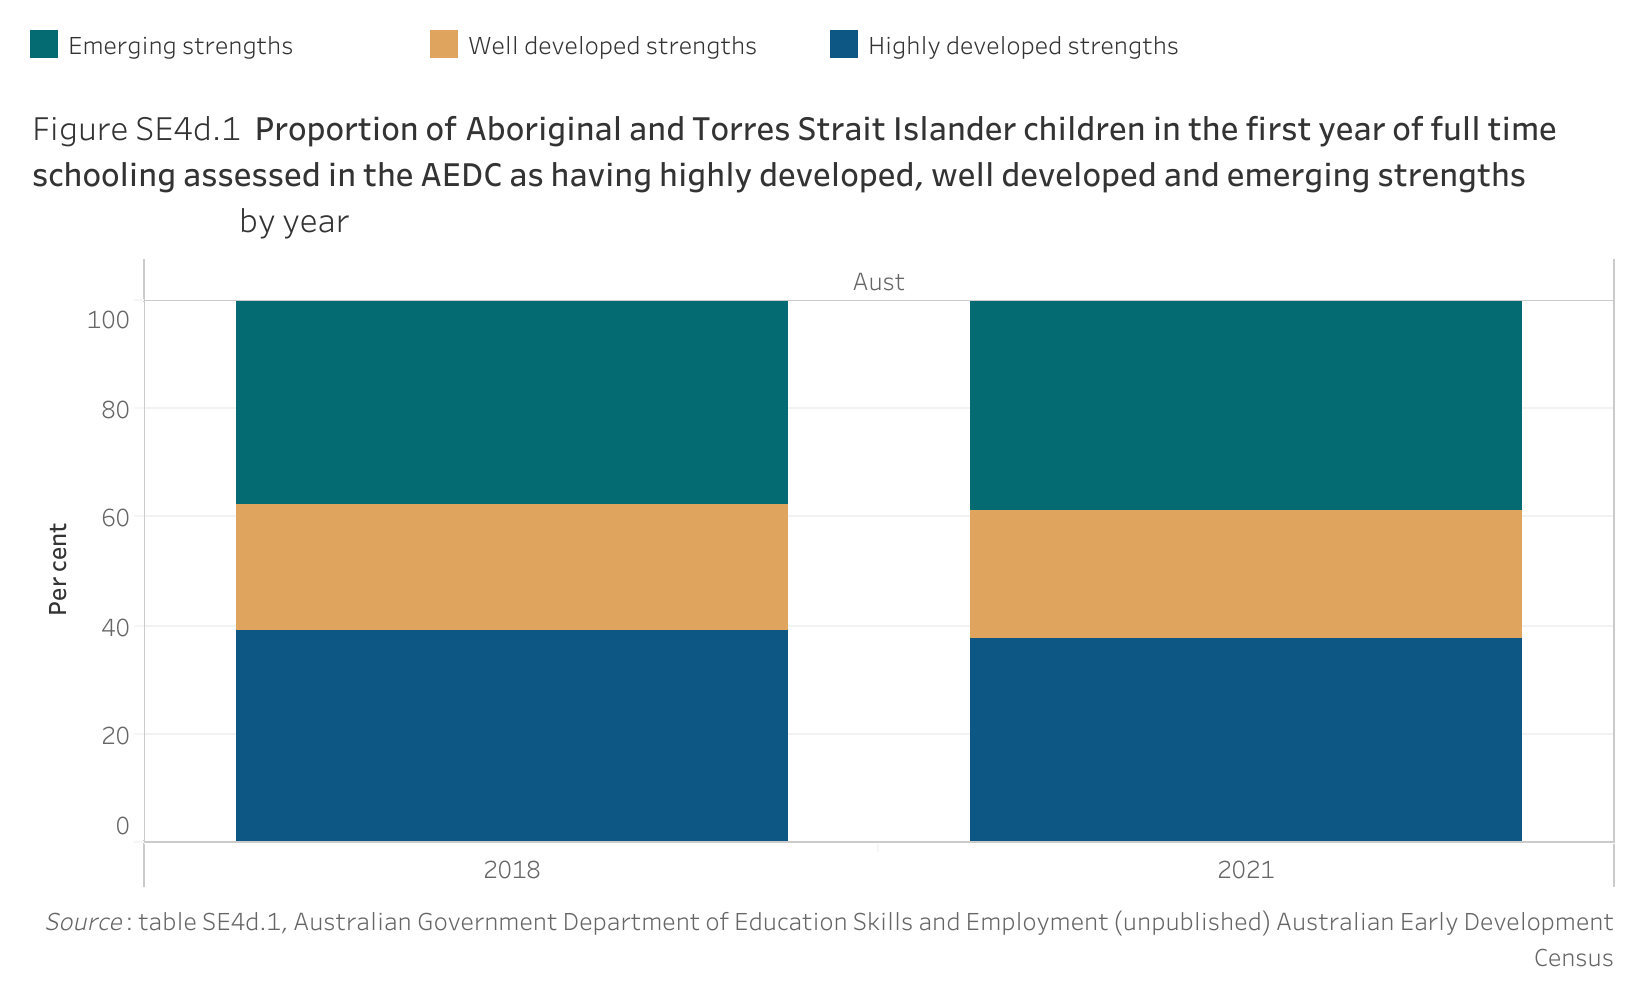 Figure SE4d.1 shows the proportion of Aboriginal and Torres Strait Islander children in the first year of full time schooling assessed in the Australian Early Development Census as having highly developed, well developed and emerging strengths, by year. More details can be found within the text near this image.